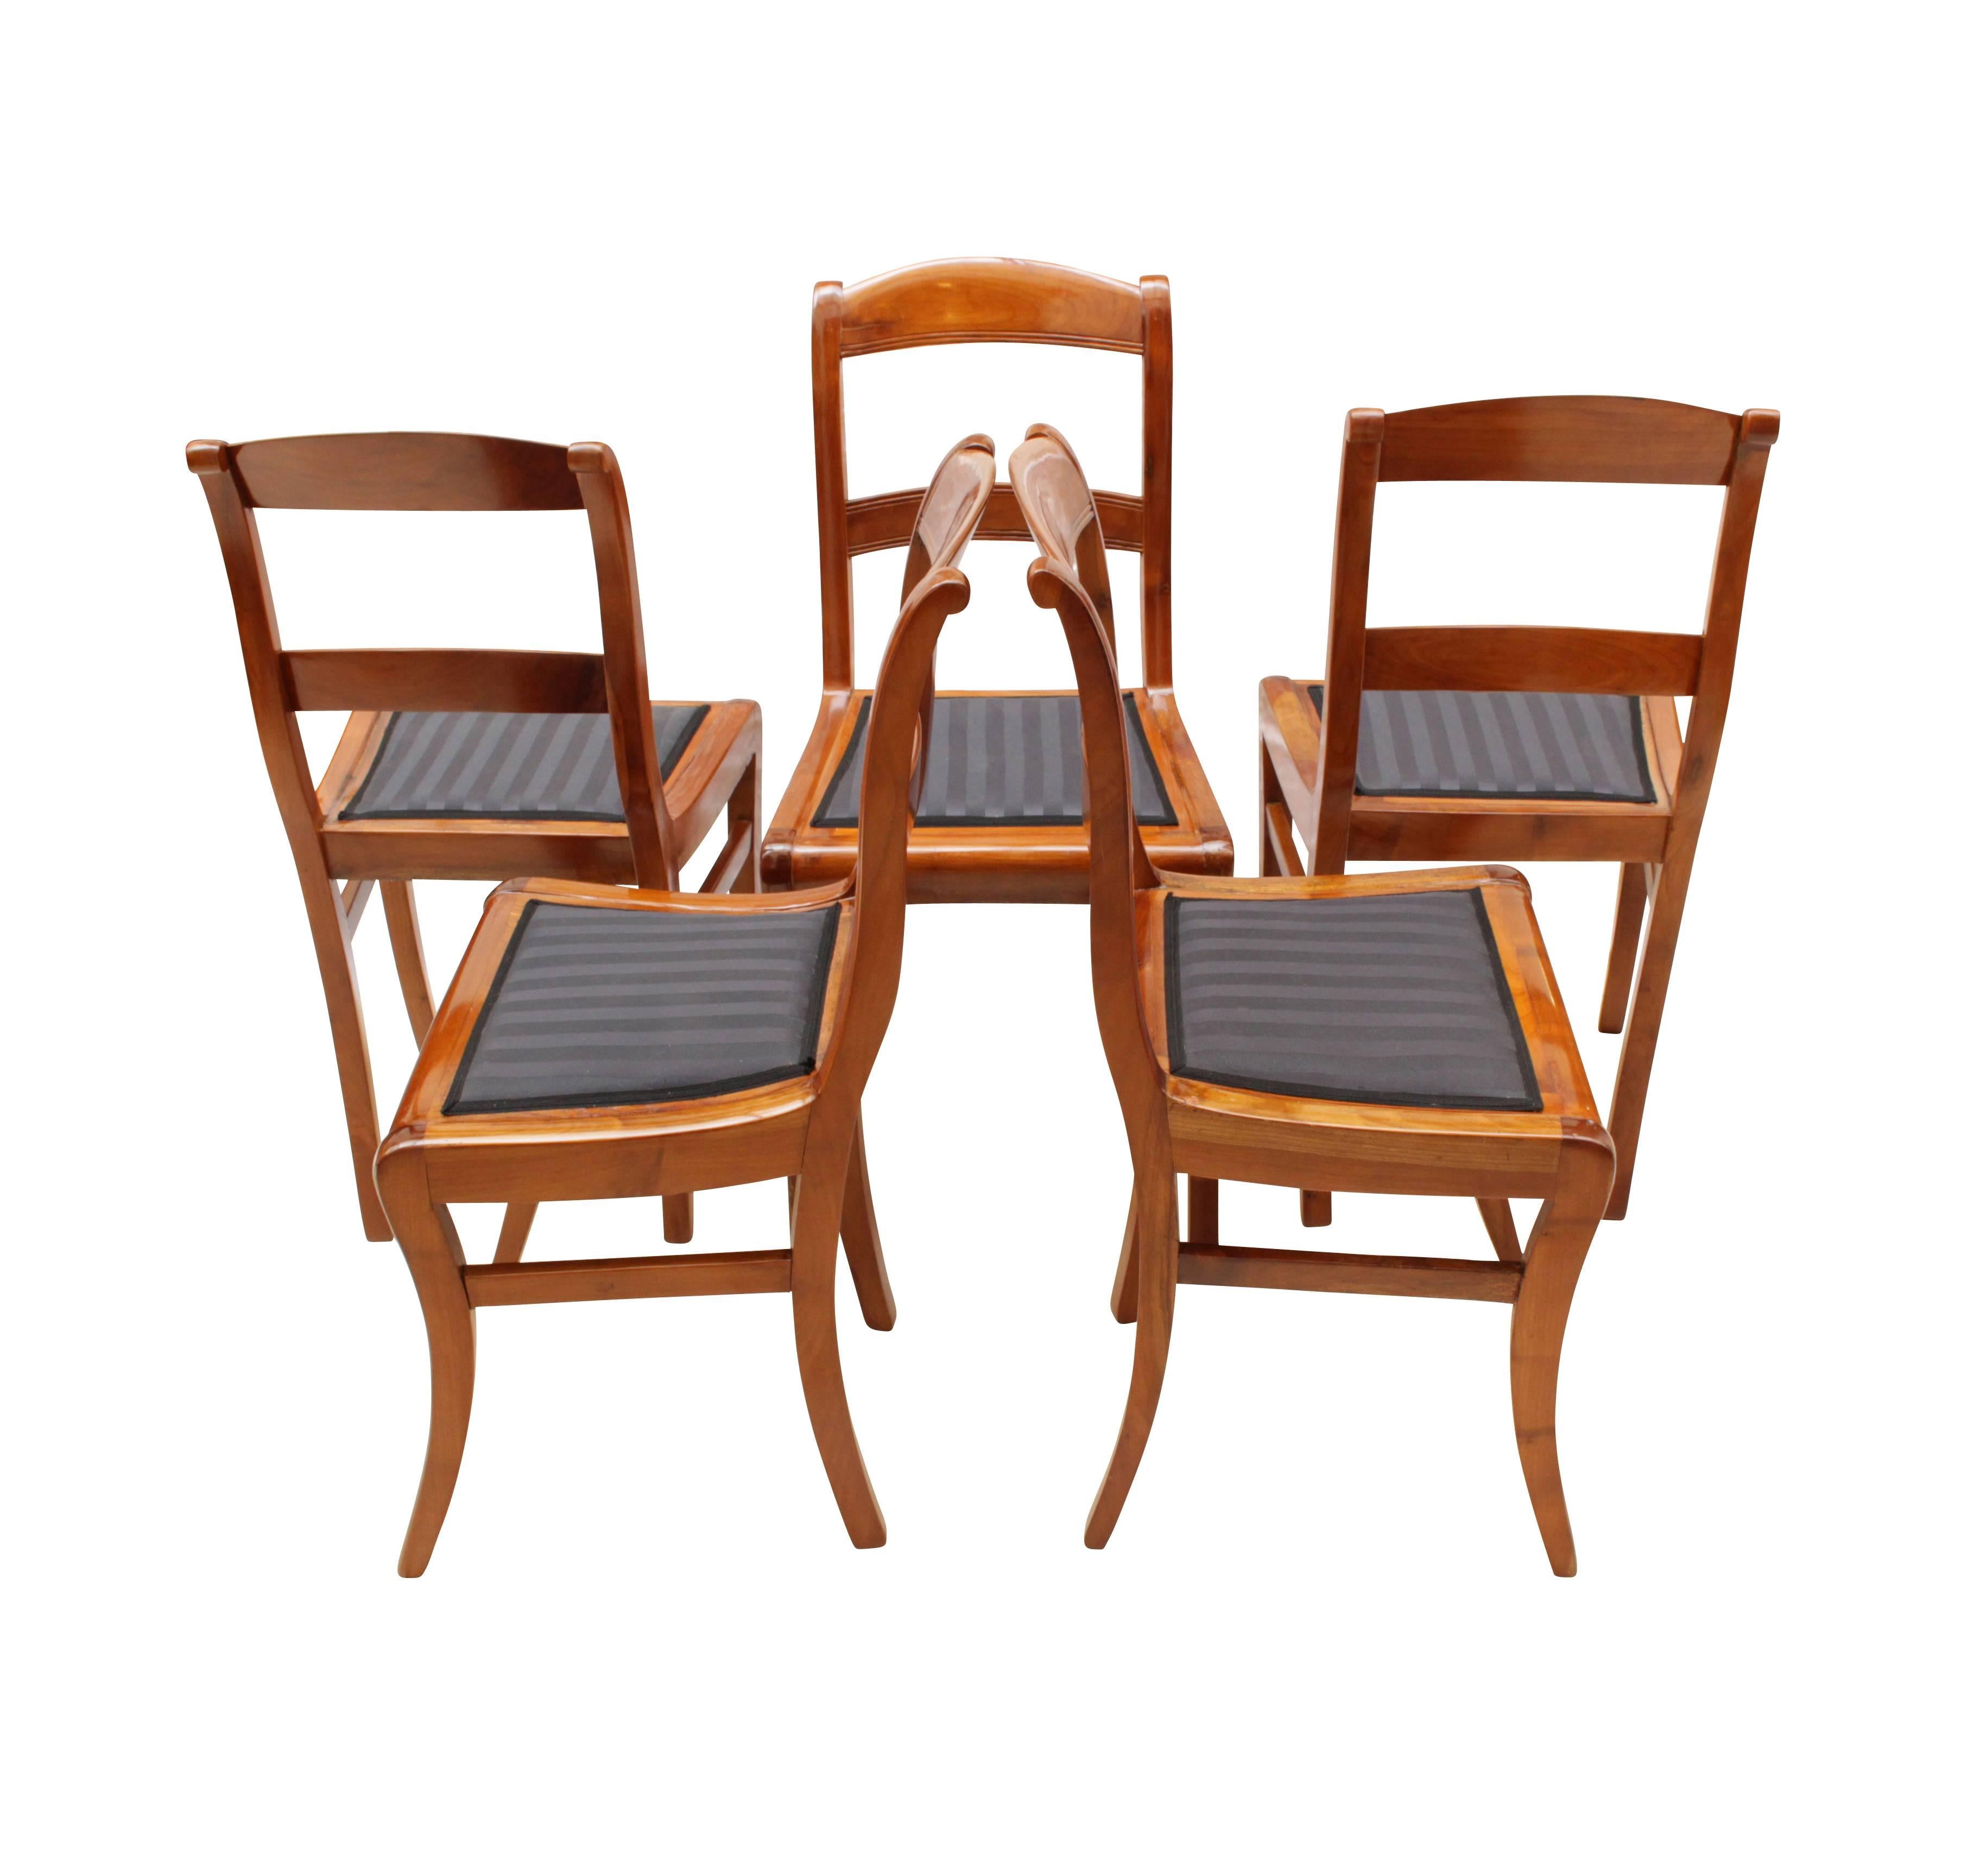 Set of five chairs, Biedermeier, solid cherrywood. The chairs were new re-upholstered. In good restored condition.
Measure: Seat height 45cm.